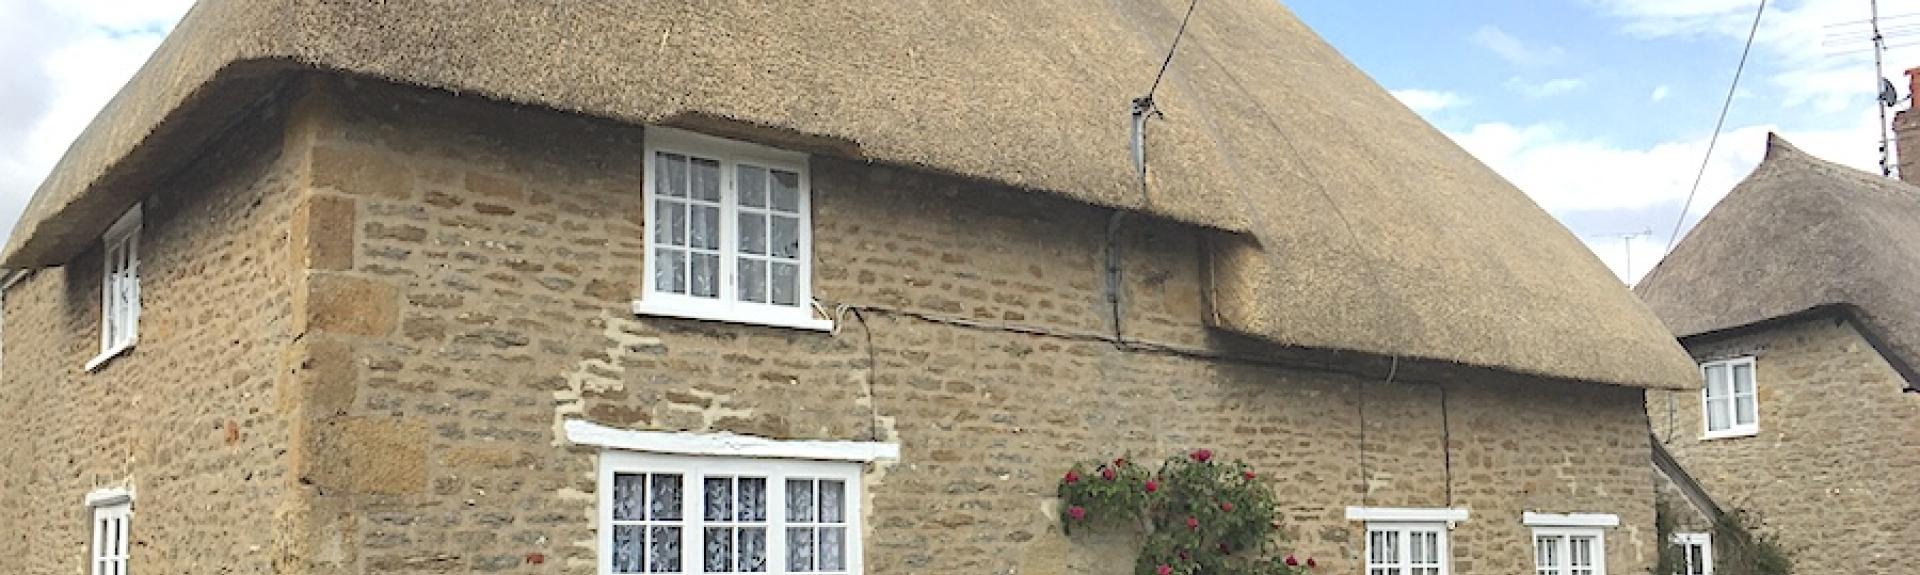 A 2-storey, thatched Dorset holiday cottage on a quiet village street.